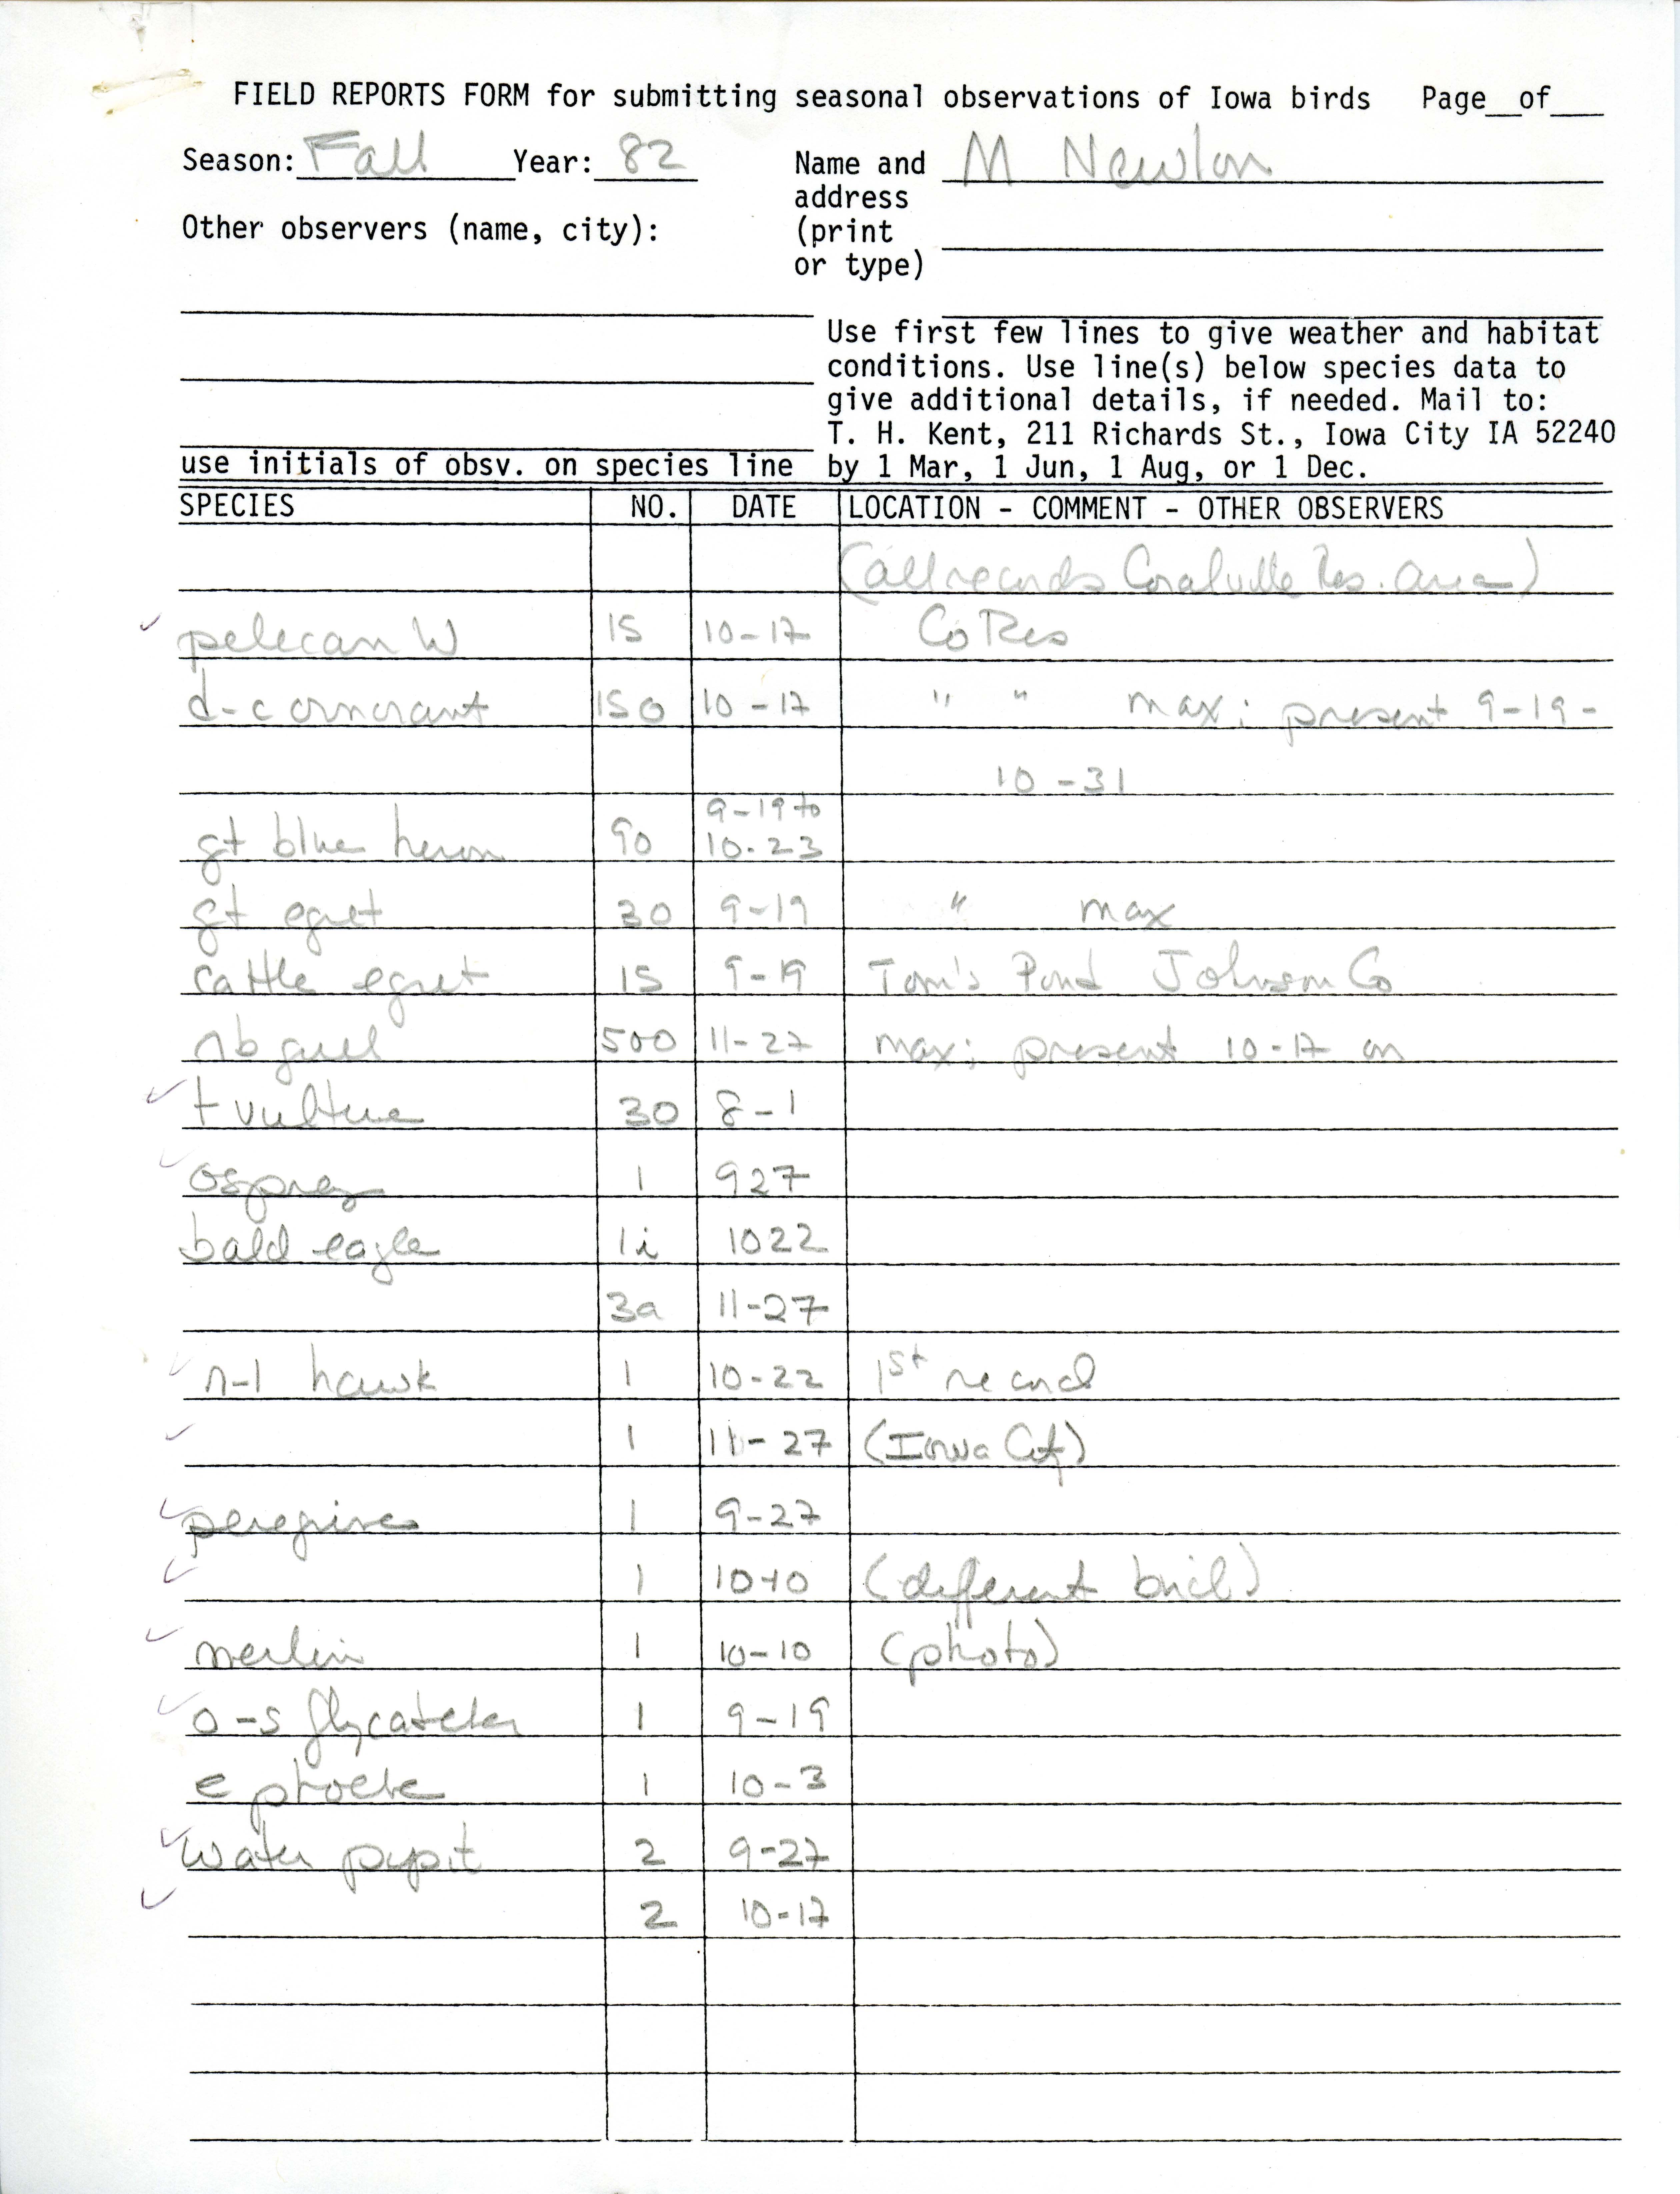 Field notes contributed by Michael C. Newlon, fall 1982